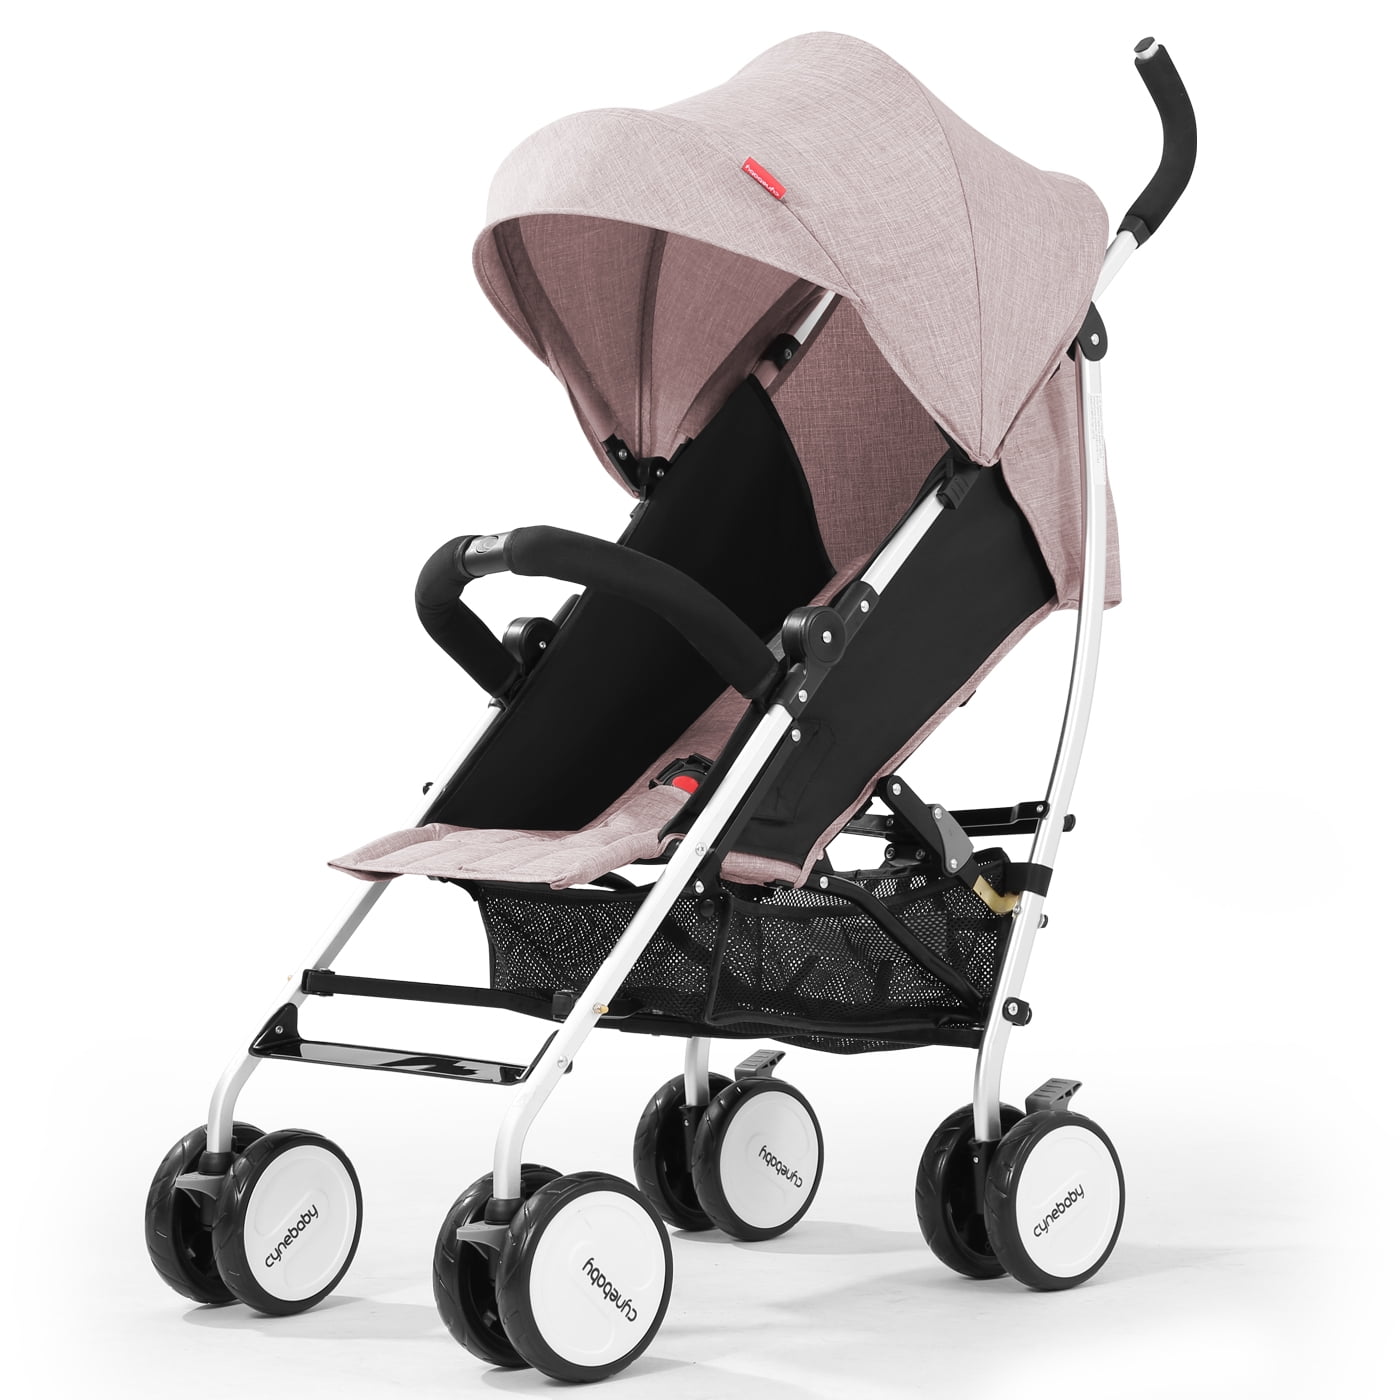 Baby Stroller,Umbrella Stroller,Lightweight Compact Travel Stroller One Hand Fold,Linen Fabric,Full Recline Up 170° Baby Can Sit Or Lie Down Pull Handle Can Take It On The Airplane